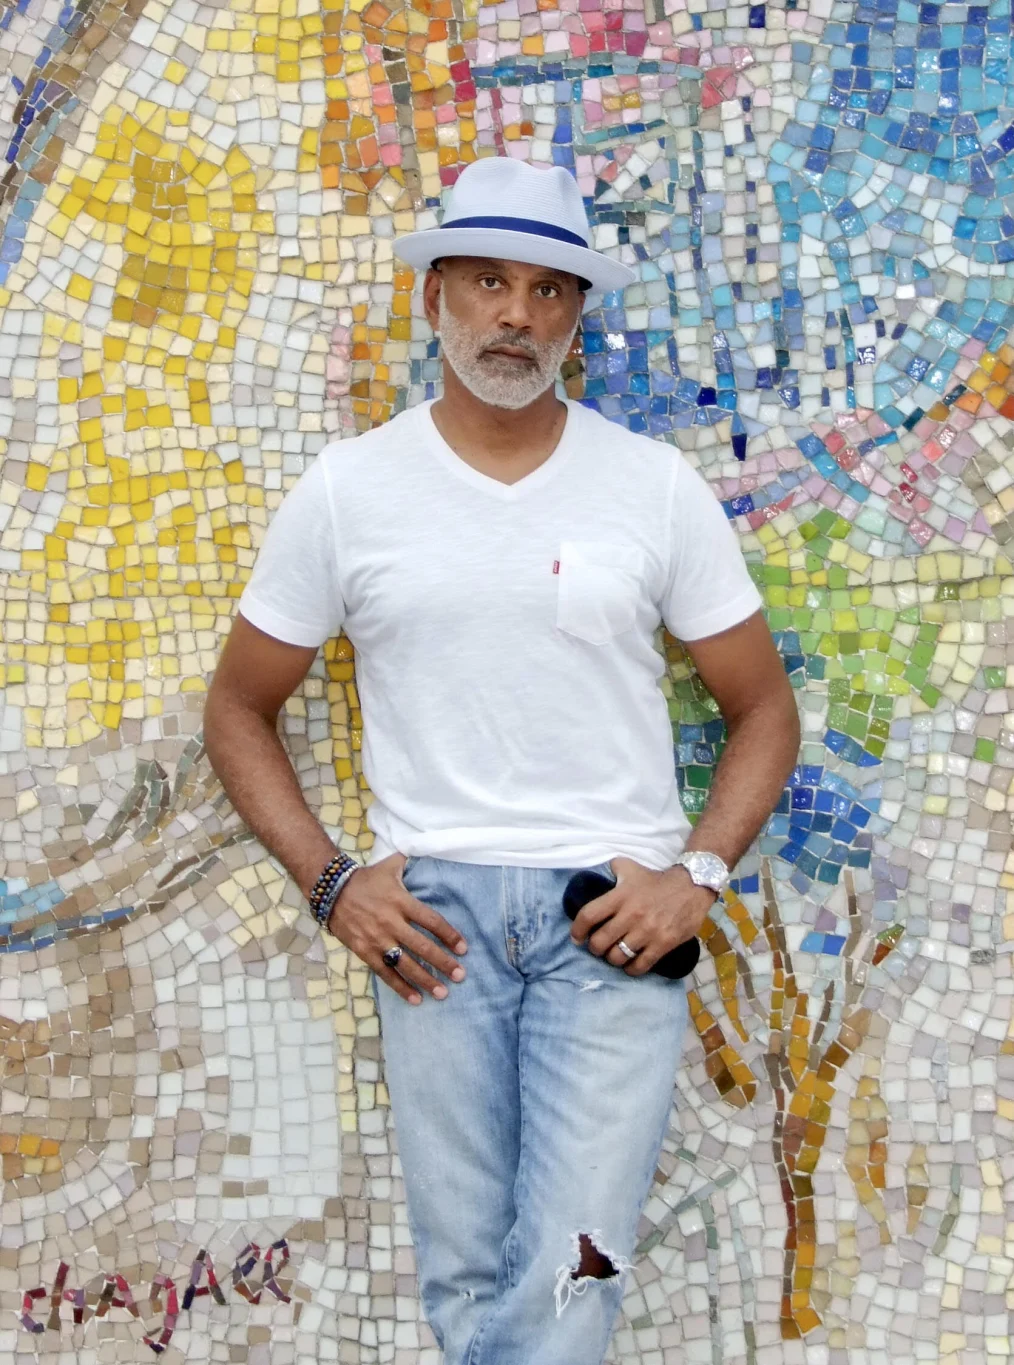 A man with a medium skin tone in a white fedora hat and a white tshirt stands in front of a colorful mosaic wall looking toward the camera.